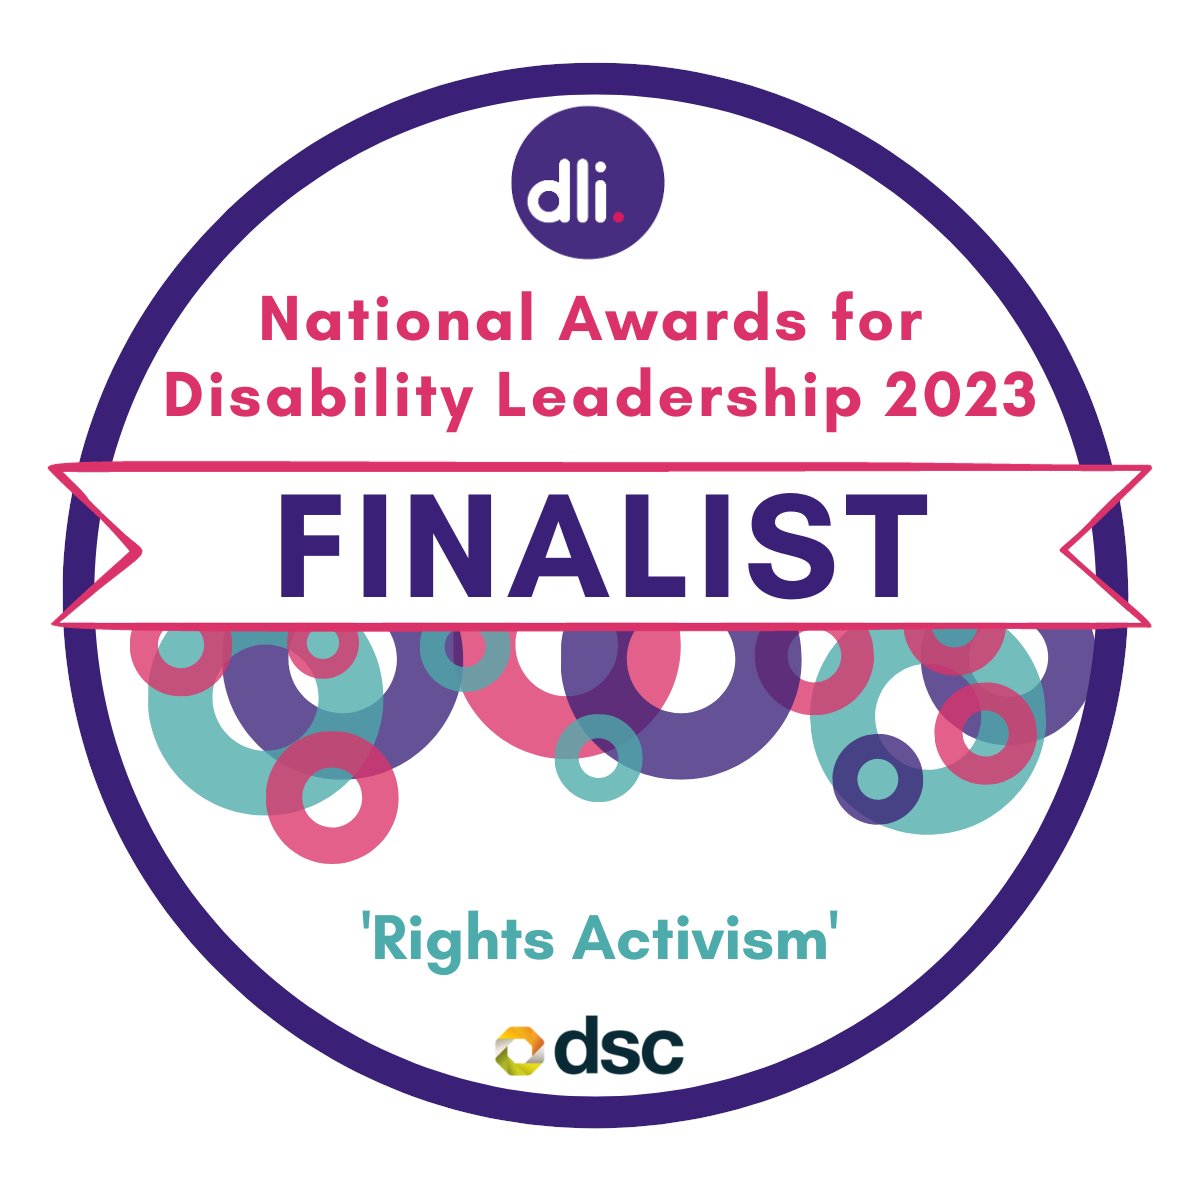 While I never do this work for accolades, I am grateful to have been shortlisted as a #Finalist in the #DisabilityAwards2023 for #RightsActivism. Thank you @DisabilityLead for helping me beat down my ongoing and often debilitating #ImposterSyndrome